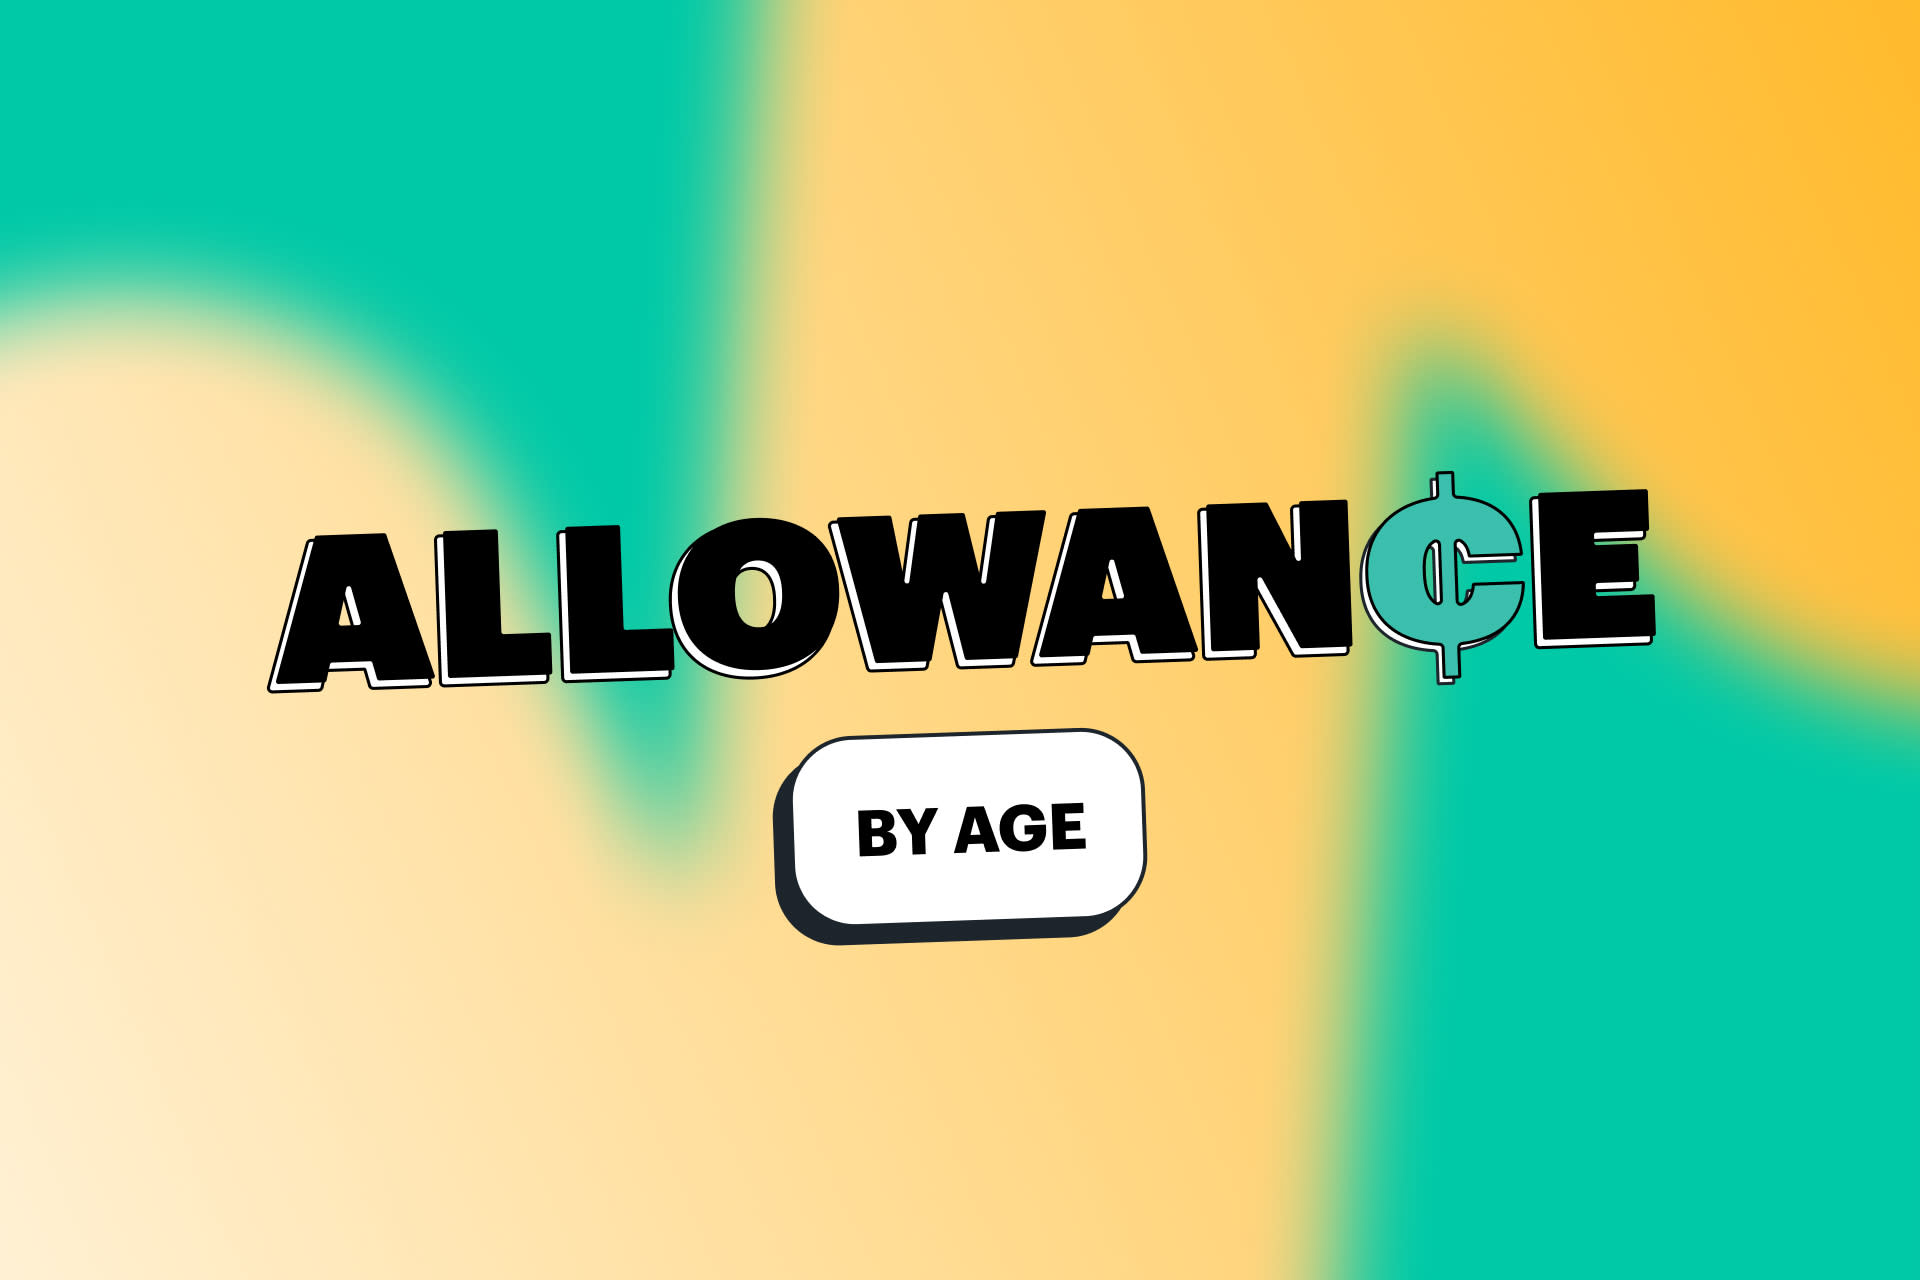 Allowance by age against yellow and green background for Greenlight's allowance by age blog in 2022